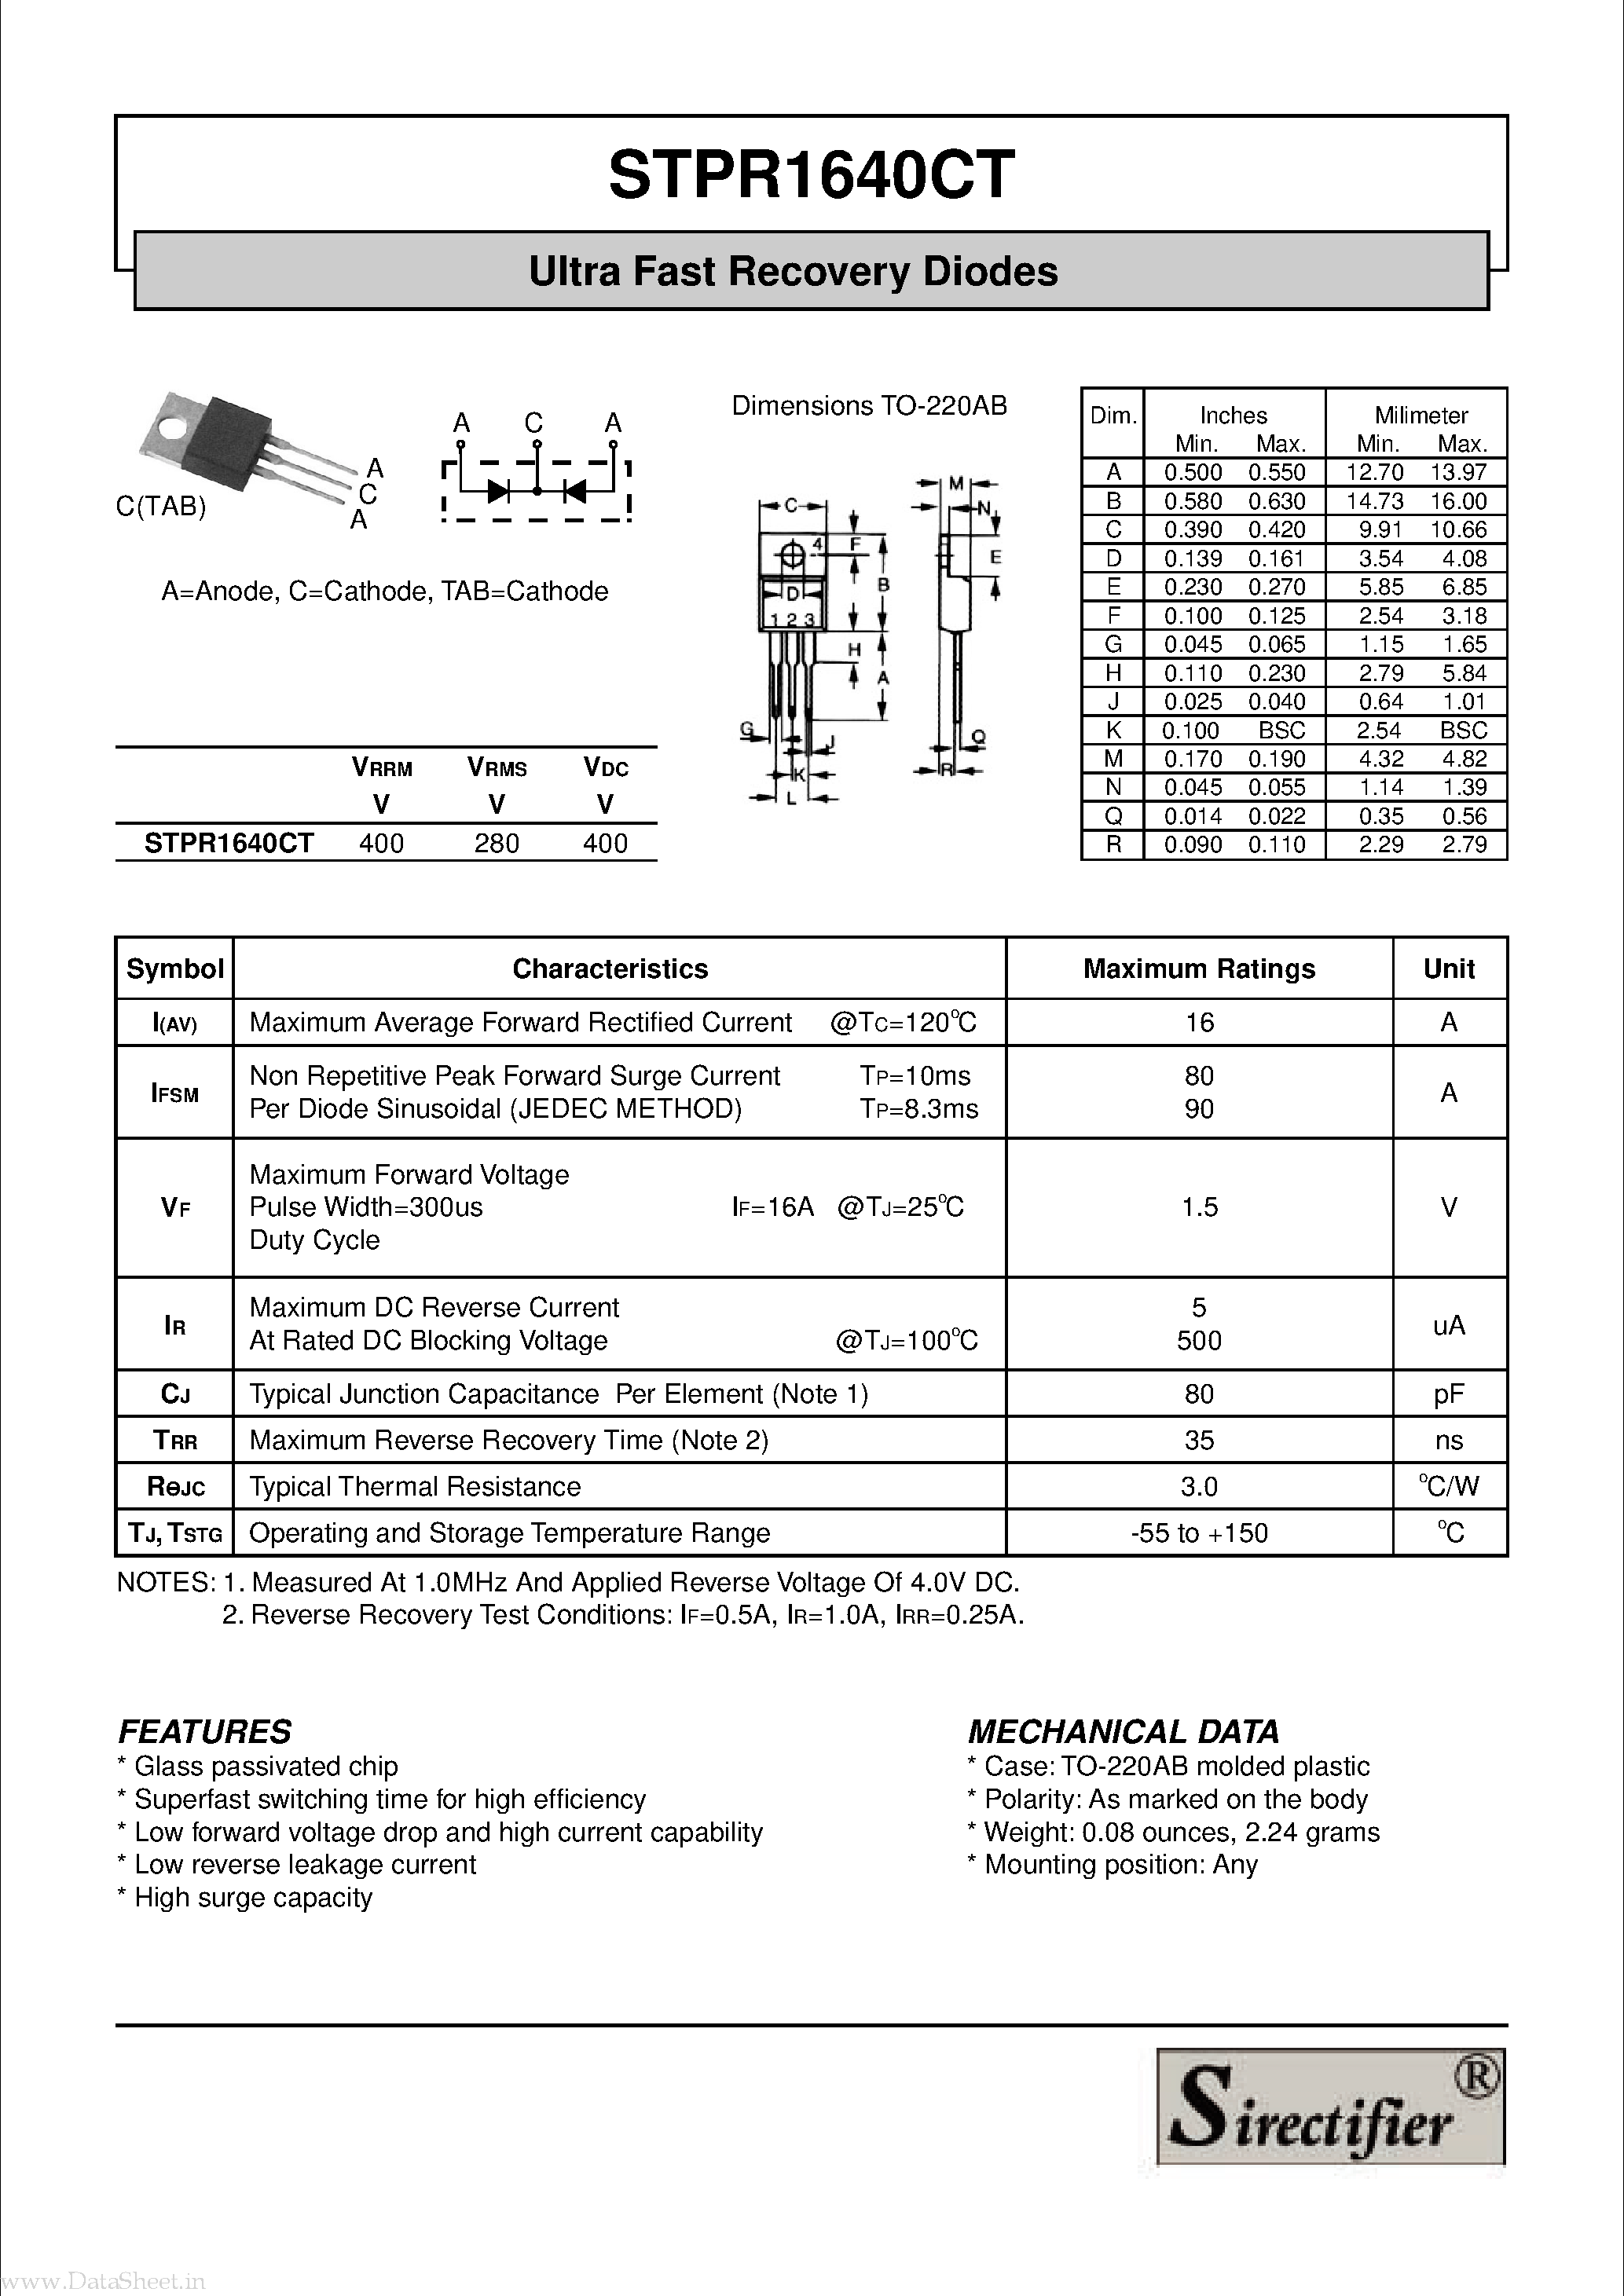 Даташит STPR1640CT - Ultra Fast Recovery Diodes страница 1